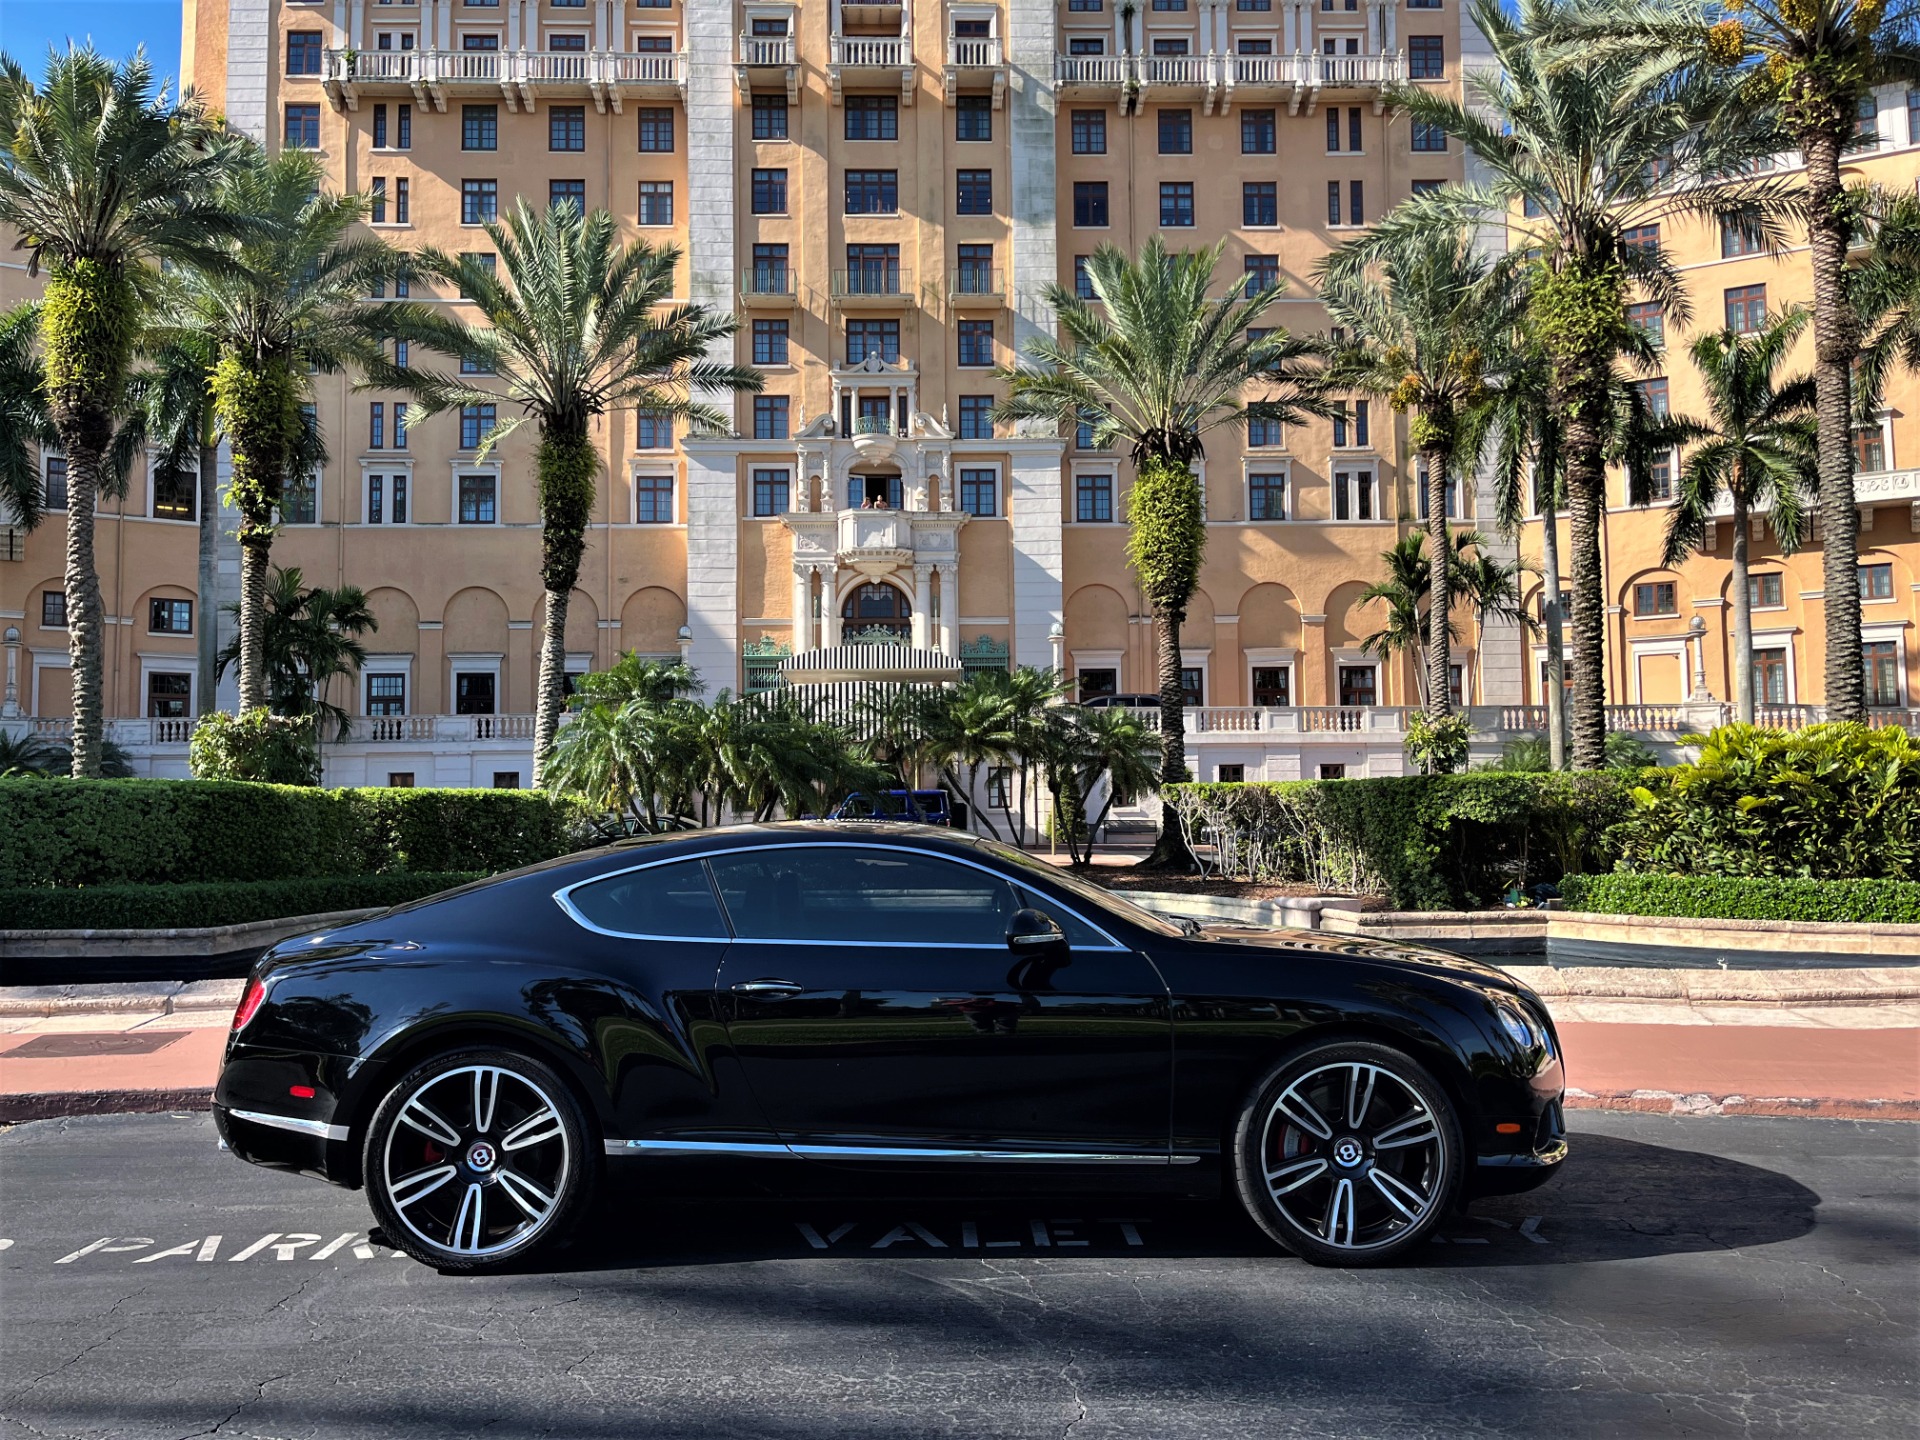 Used 2014 Bentley Continental GT V8 for sale Sold at The Gables Sports Cars in Miami FL 33146 1